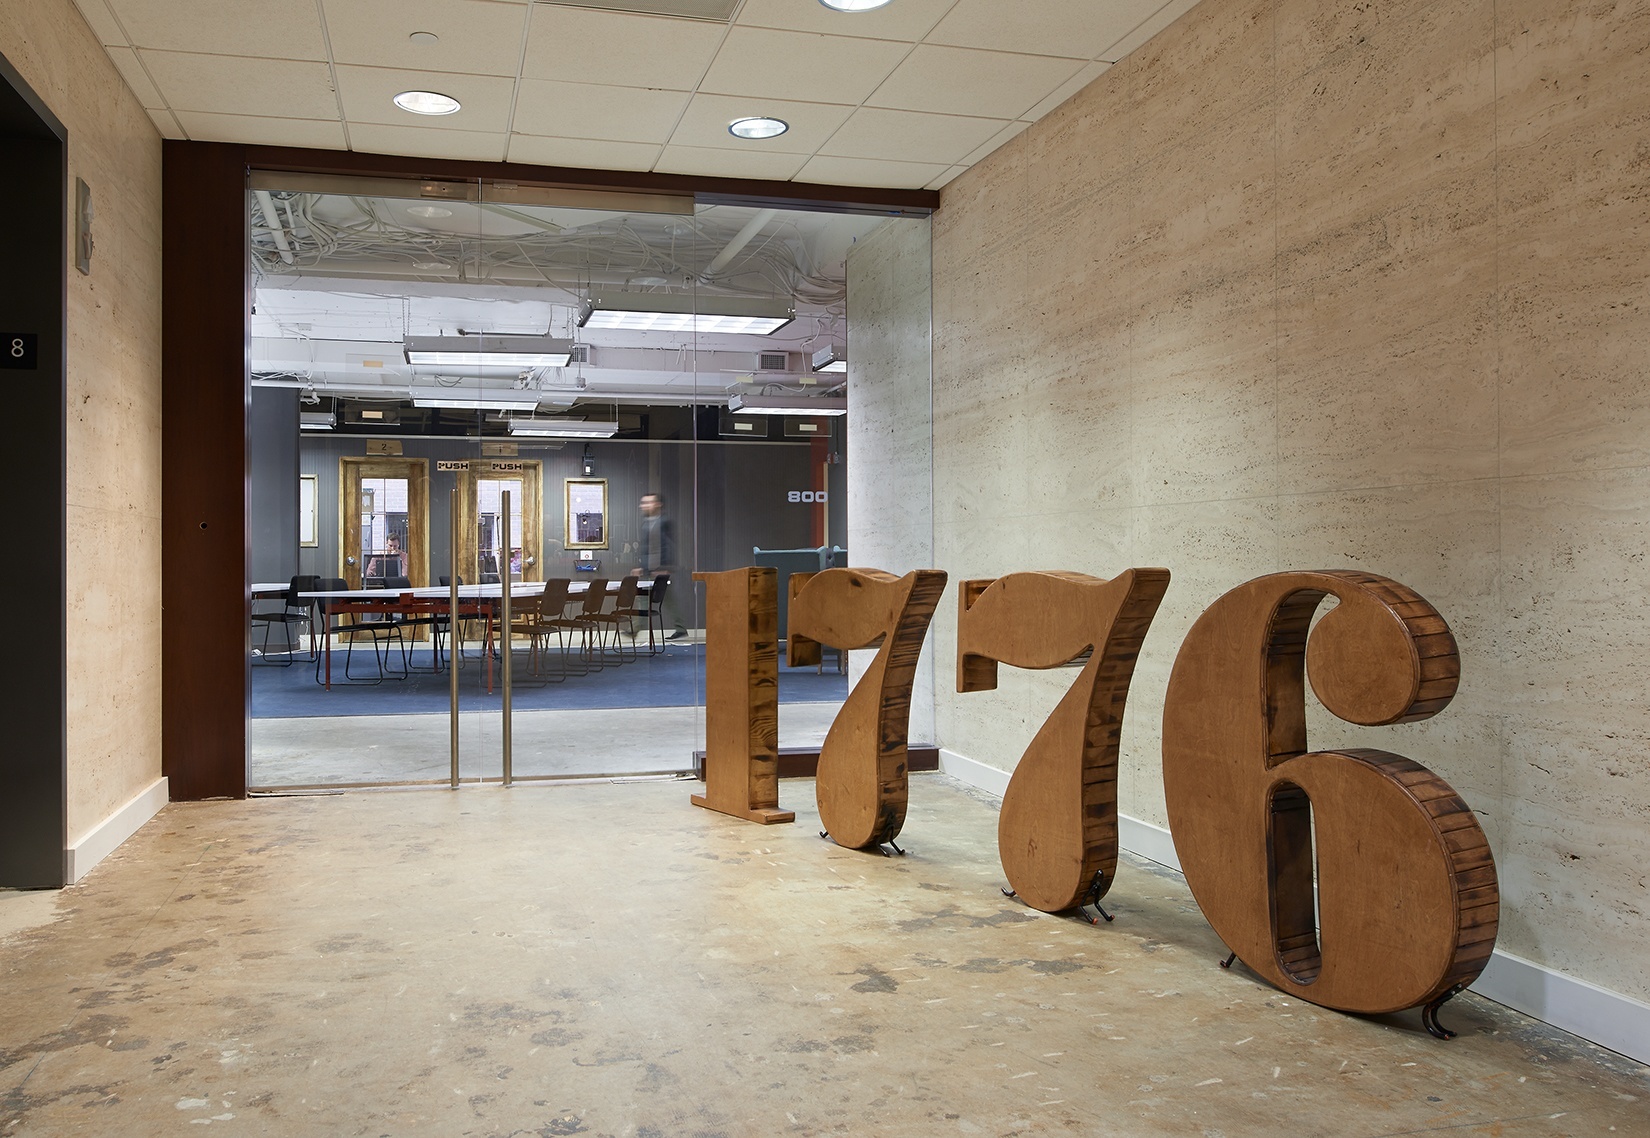 Check Out Photos of 1776 Startup Incubator